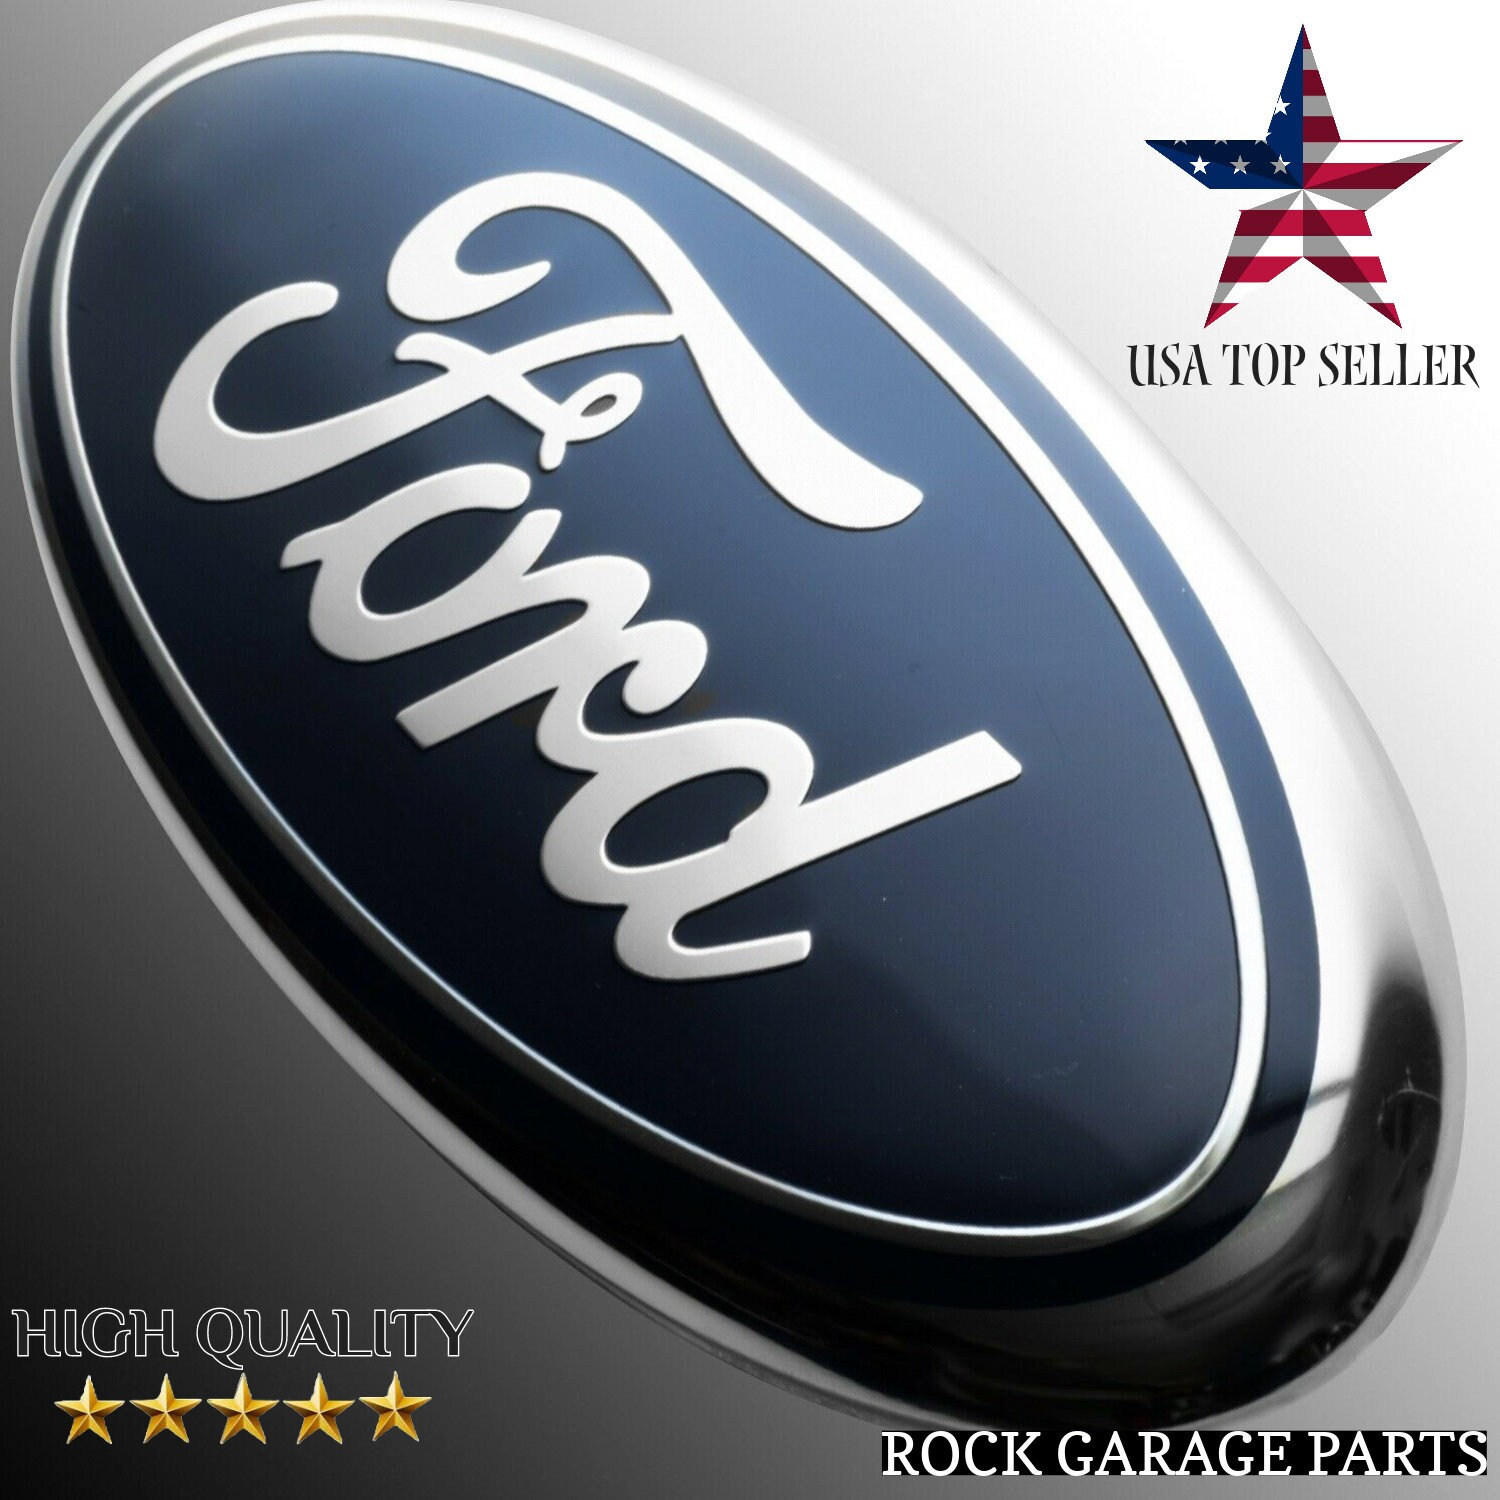 Ford Oval Logo Decal - Open Style - 8 Tall